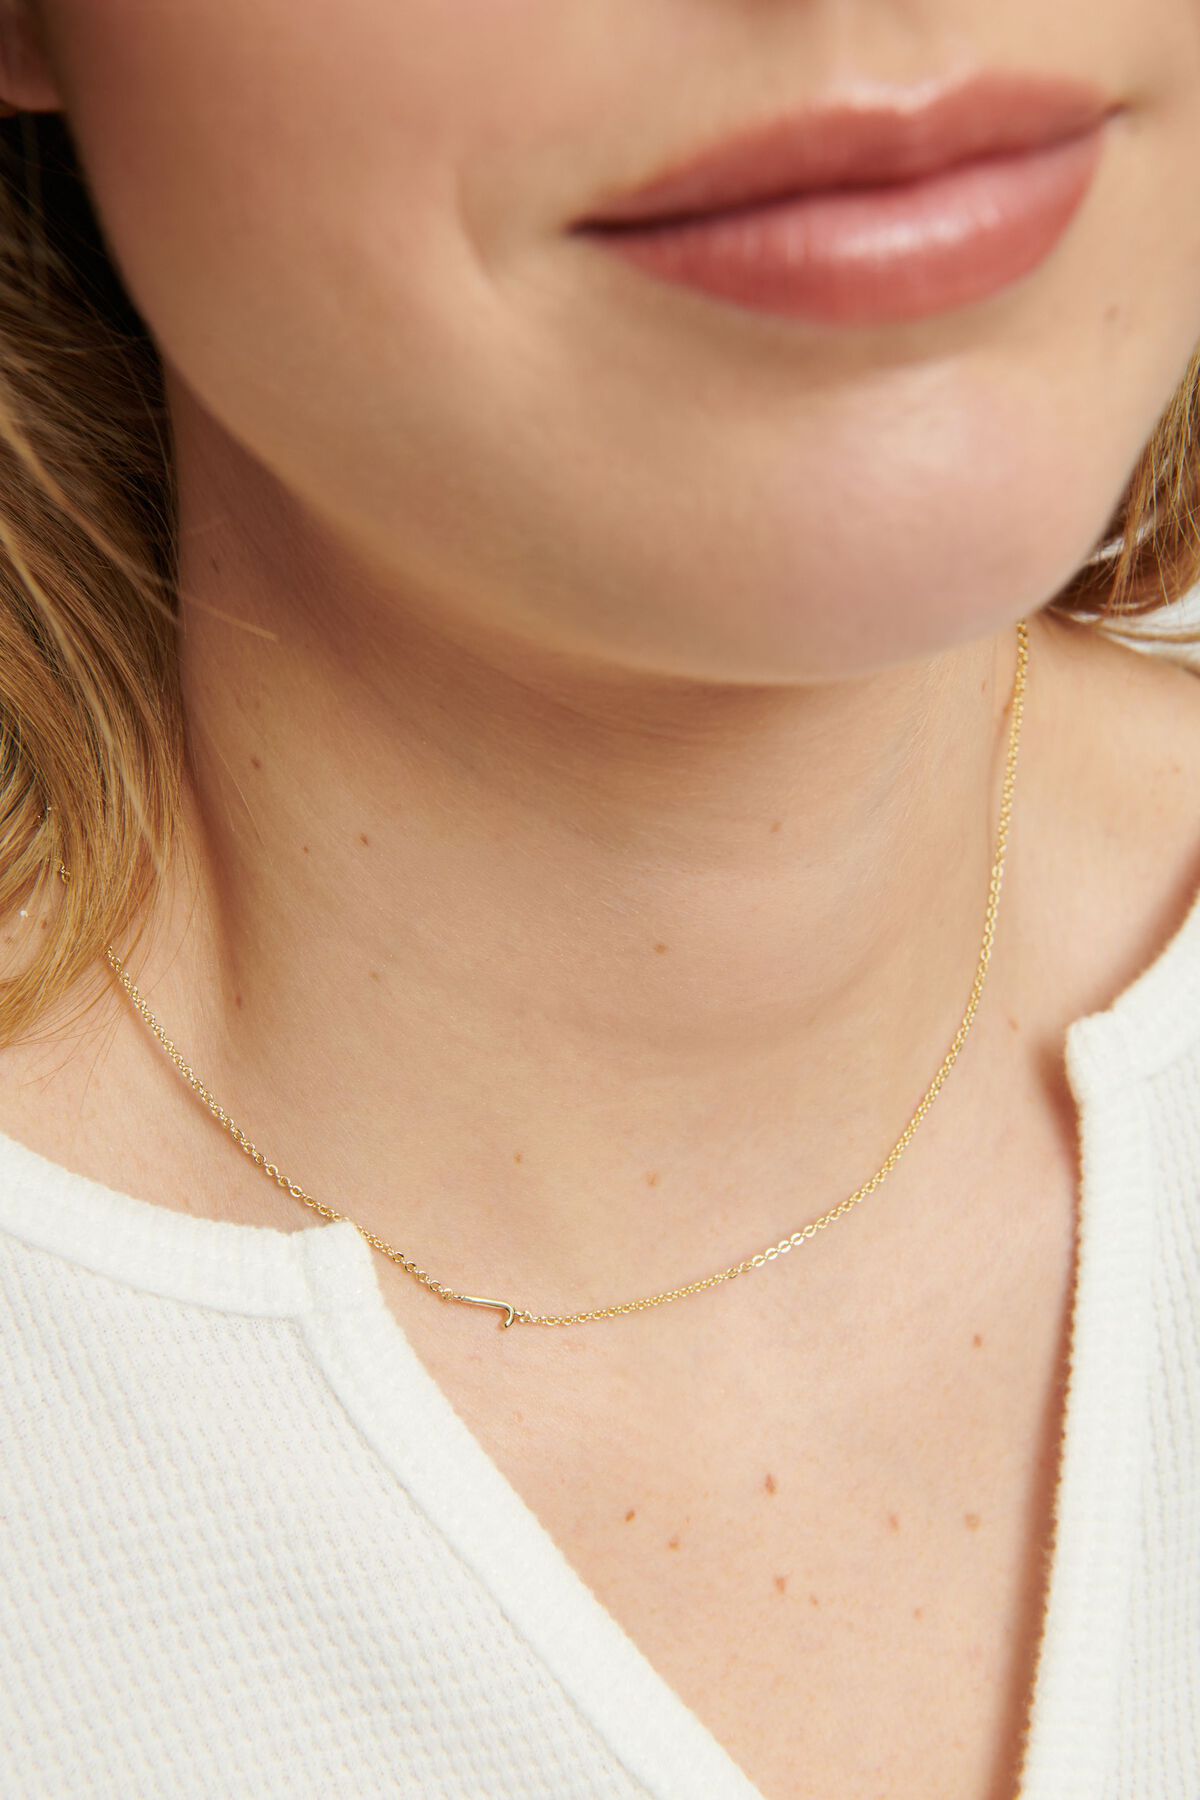 Garage 14K Gold Plated Initial Necklace. 1